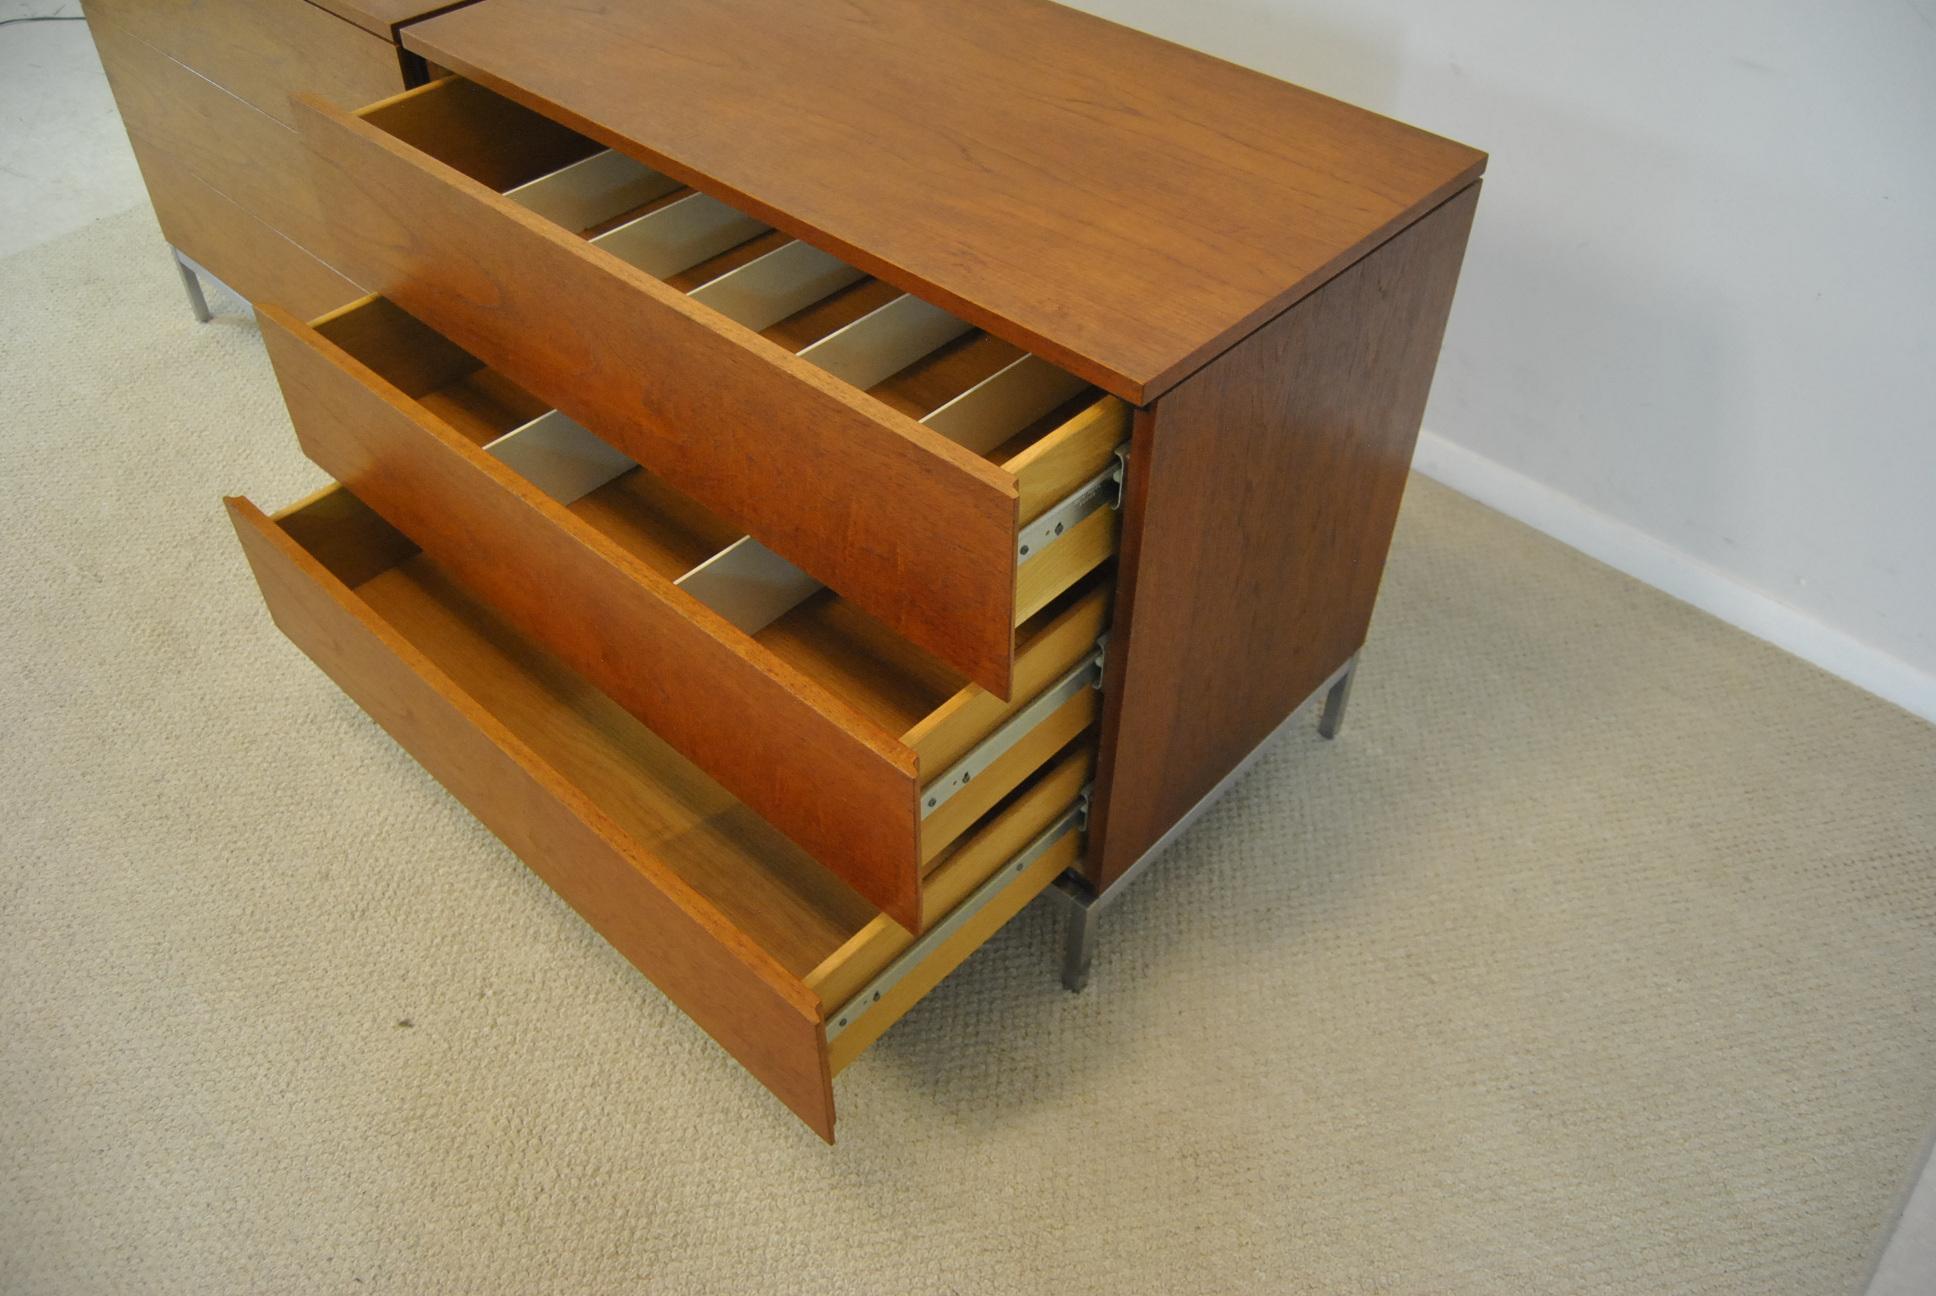 North American Mid-Century Modern Knoll Walnut Chests on Base Six Drawers